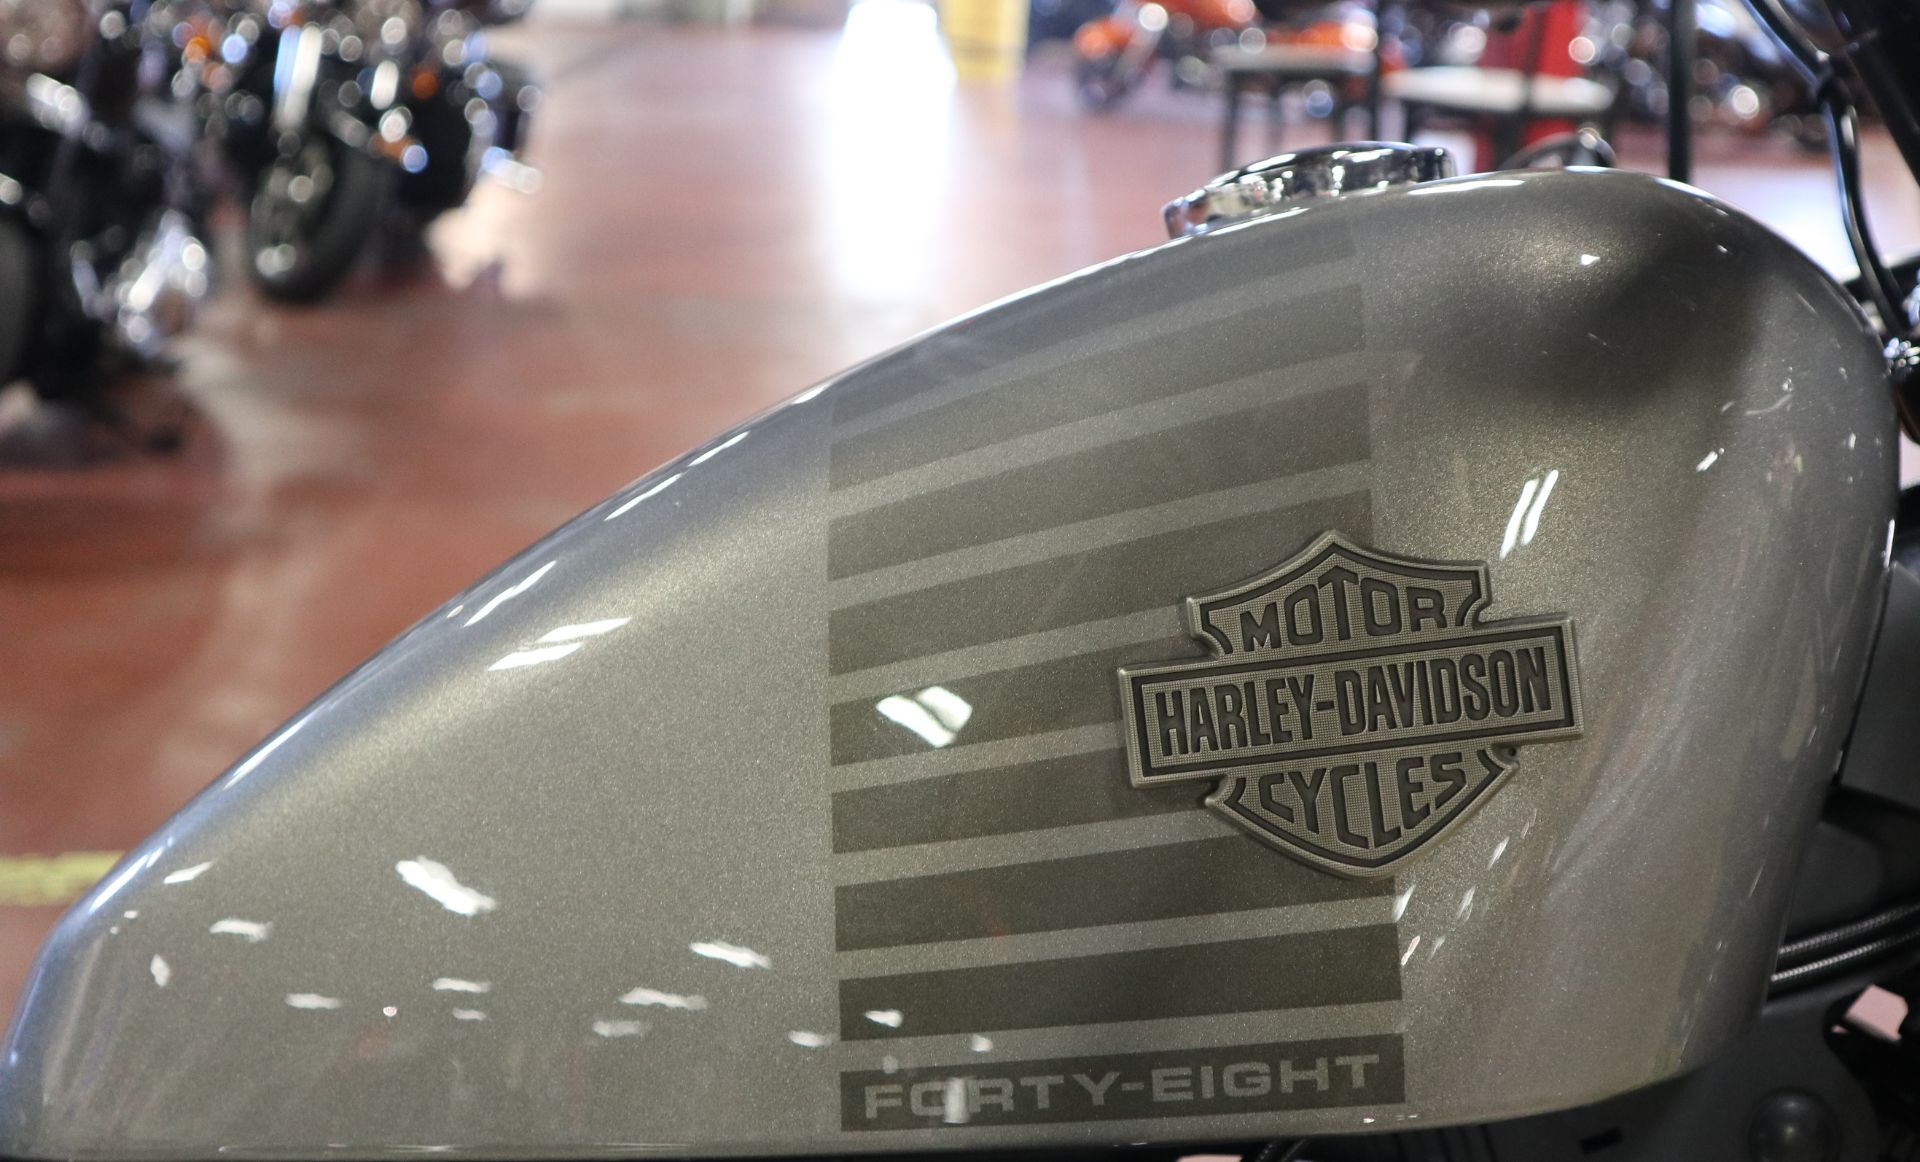 2017 Harley-Davidson Forty-Eight® in New London, Connecticut - Photo 8